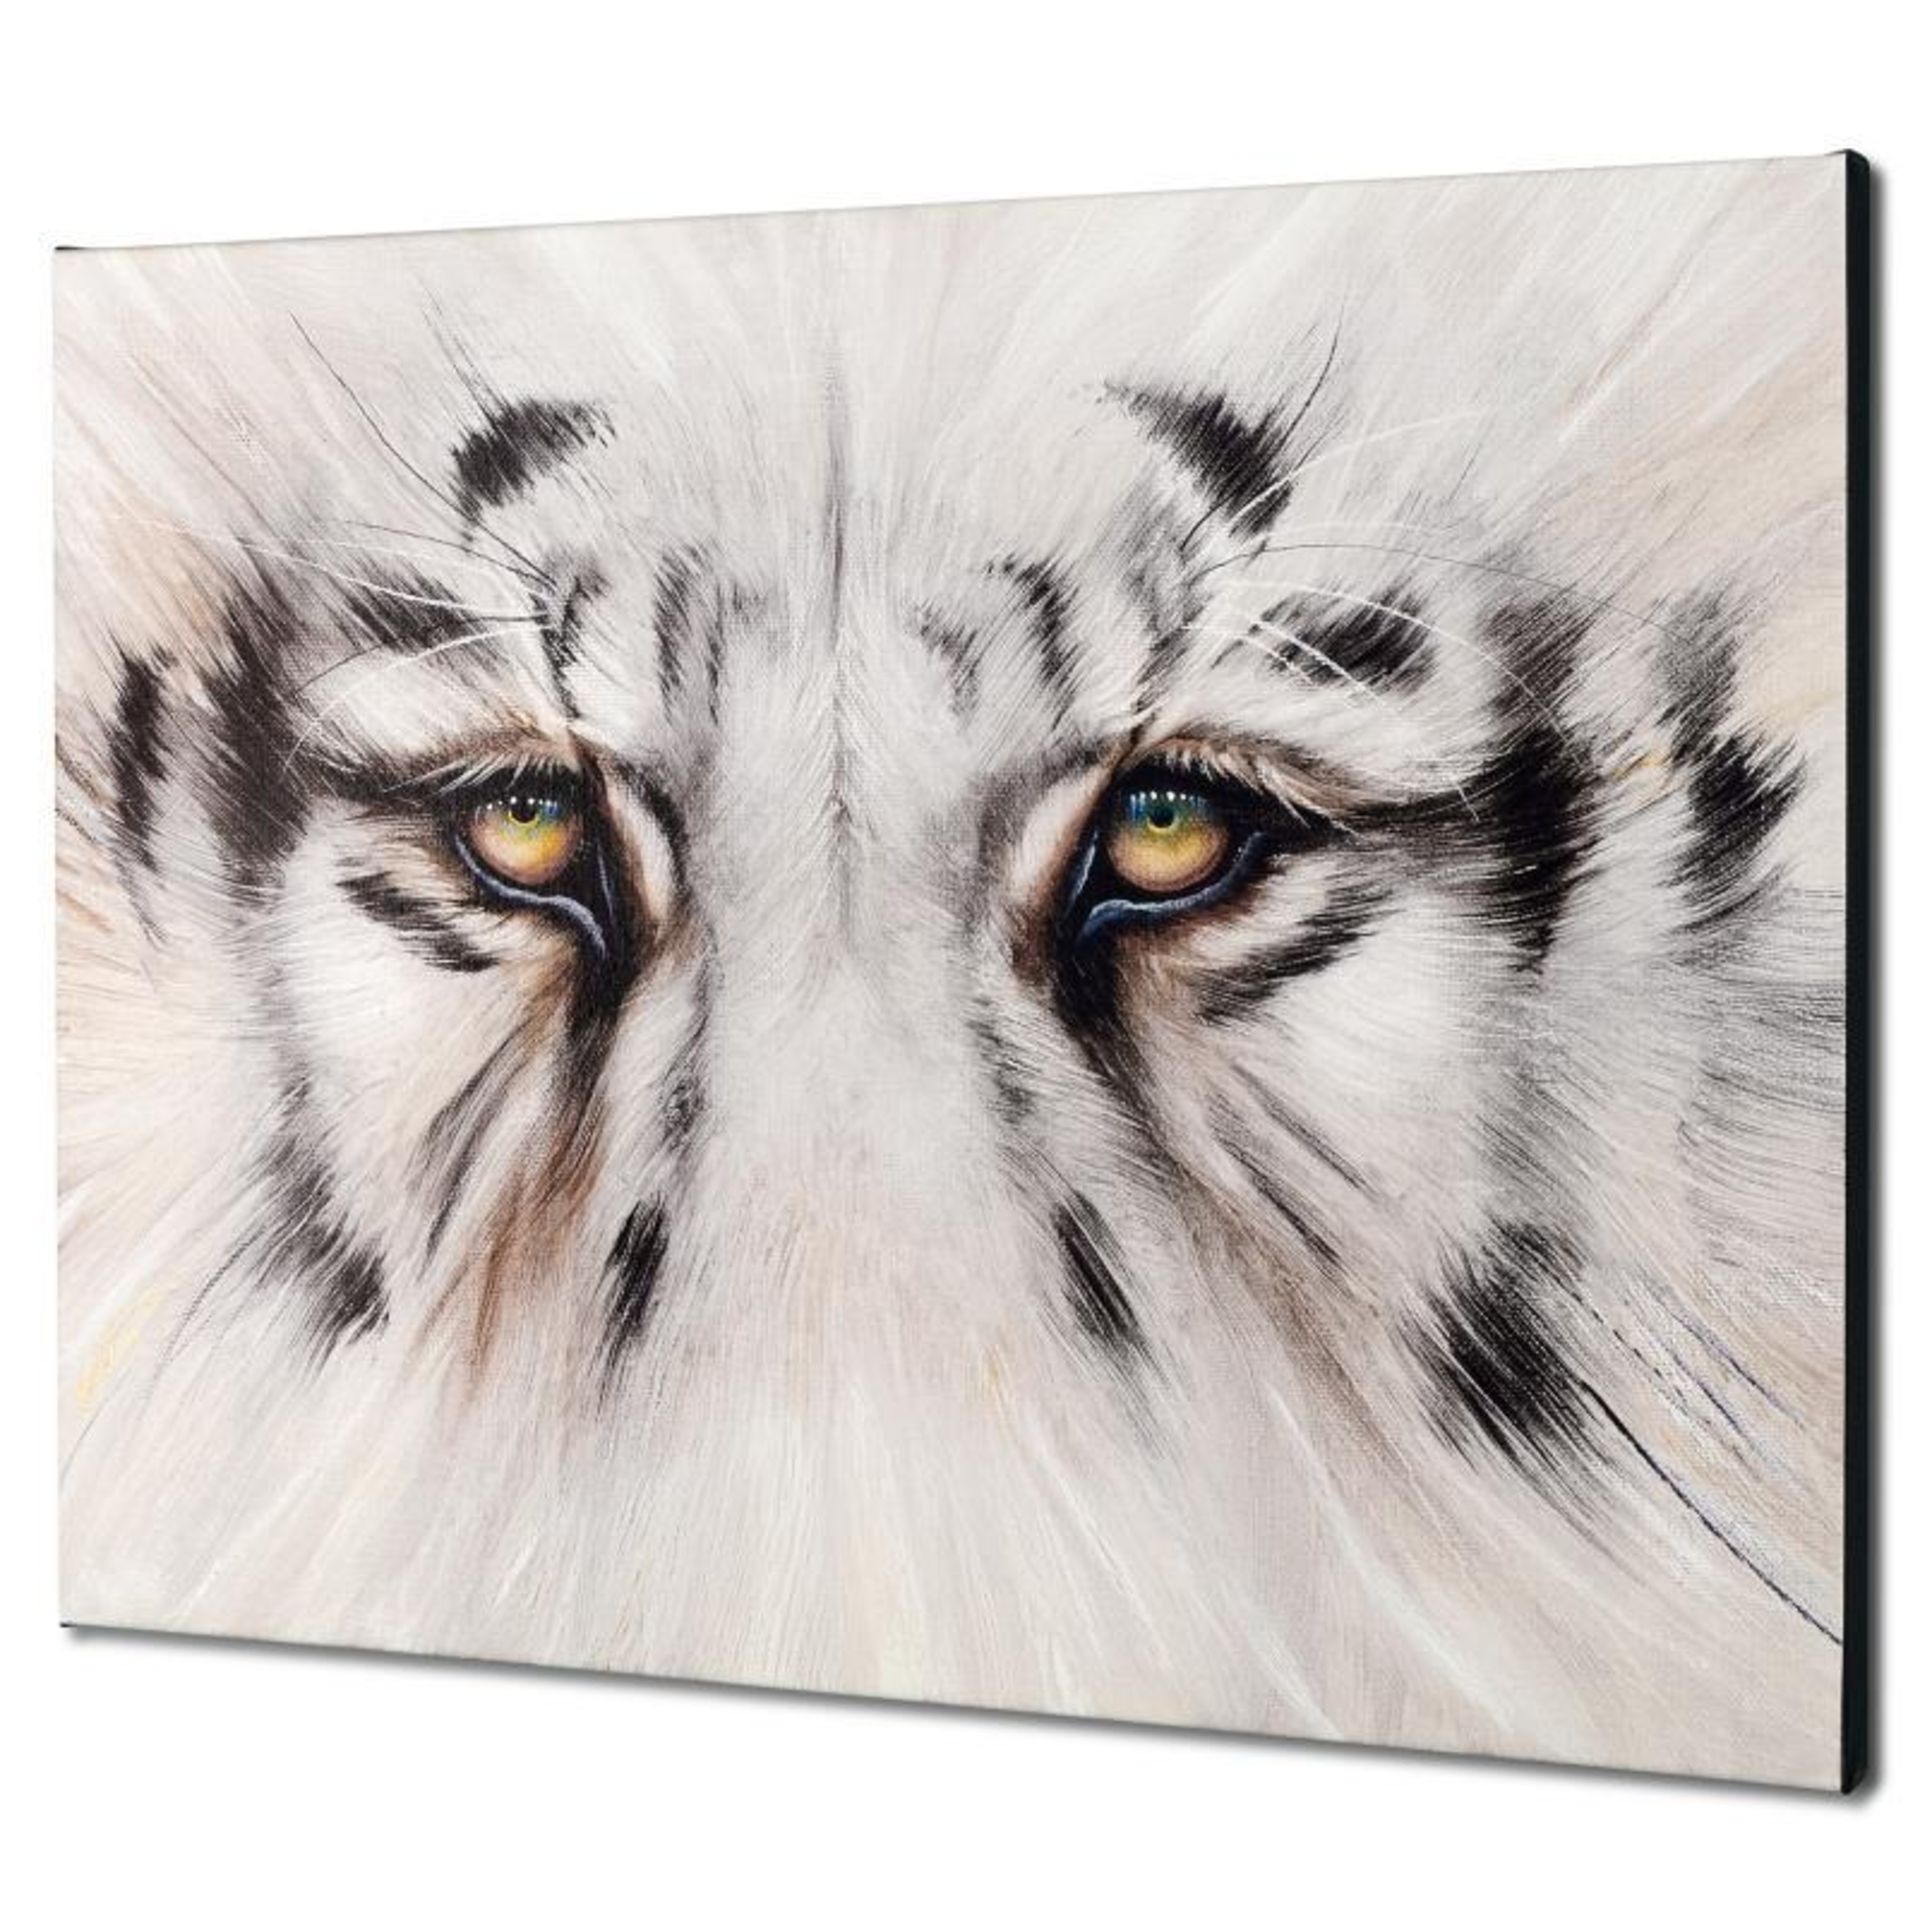 "Eye See You" Limited Edition Giclee on Canvas by Martin Katon, Numbered and Han - Image 2 of 2